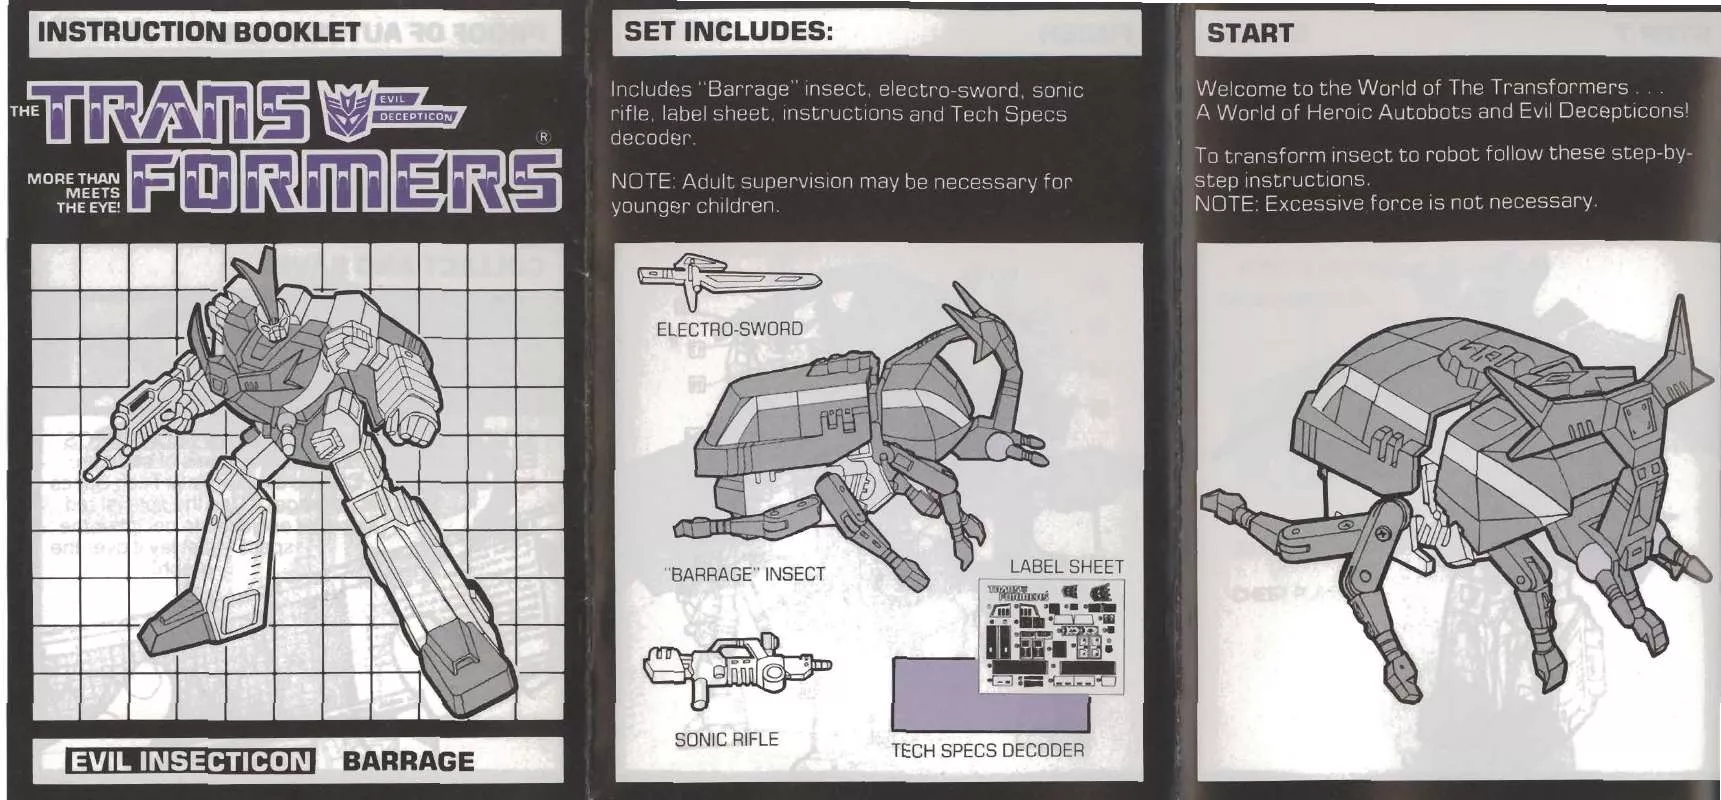 Mode d'emploi HASBRO TRANSFORMERS EVIL INSECTION BARRAGE